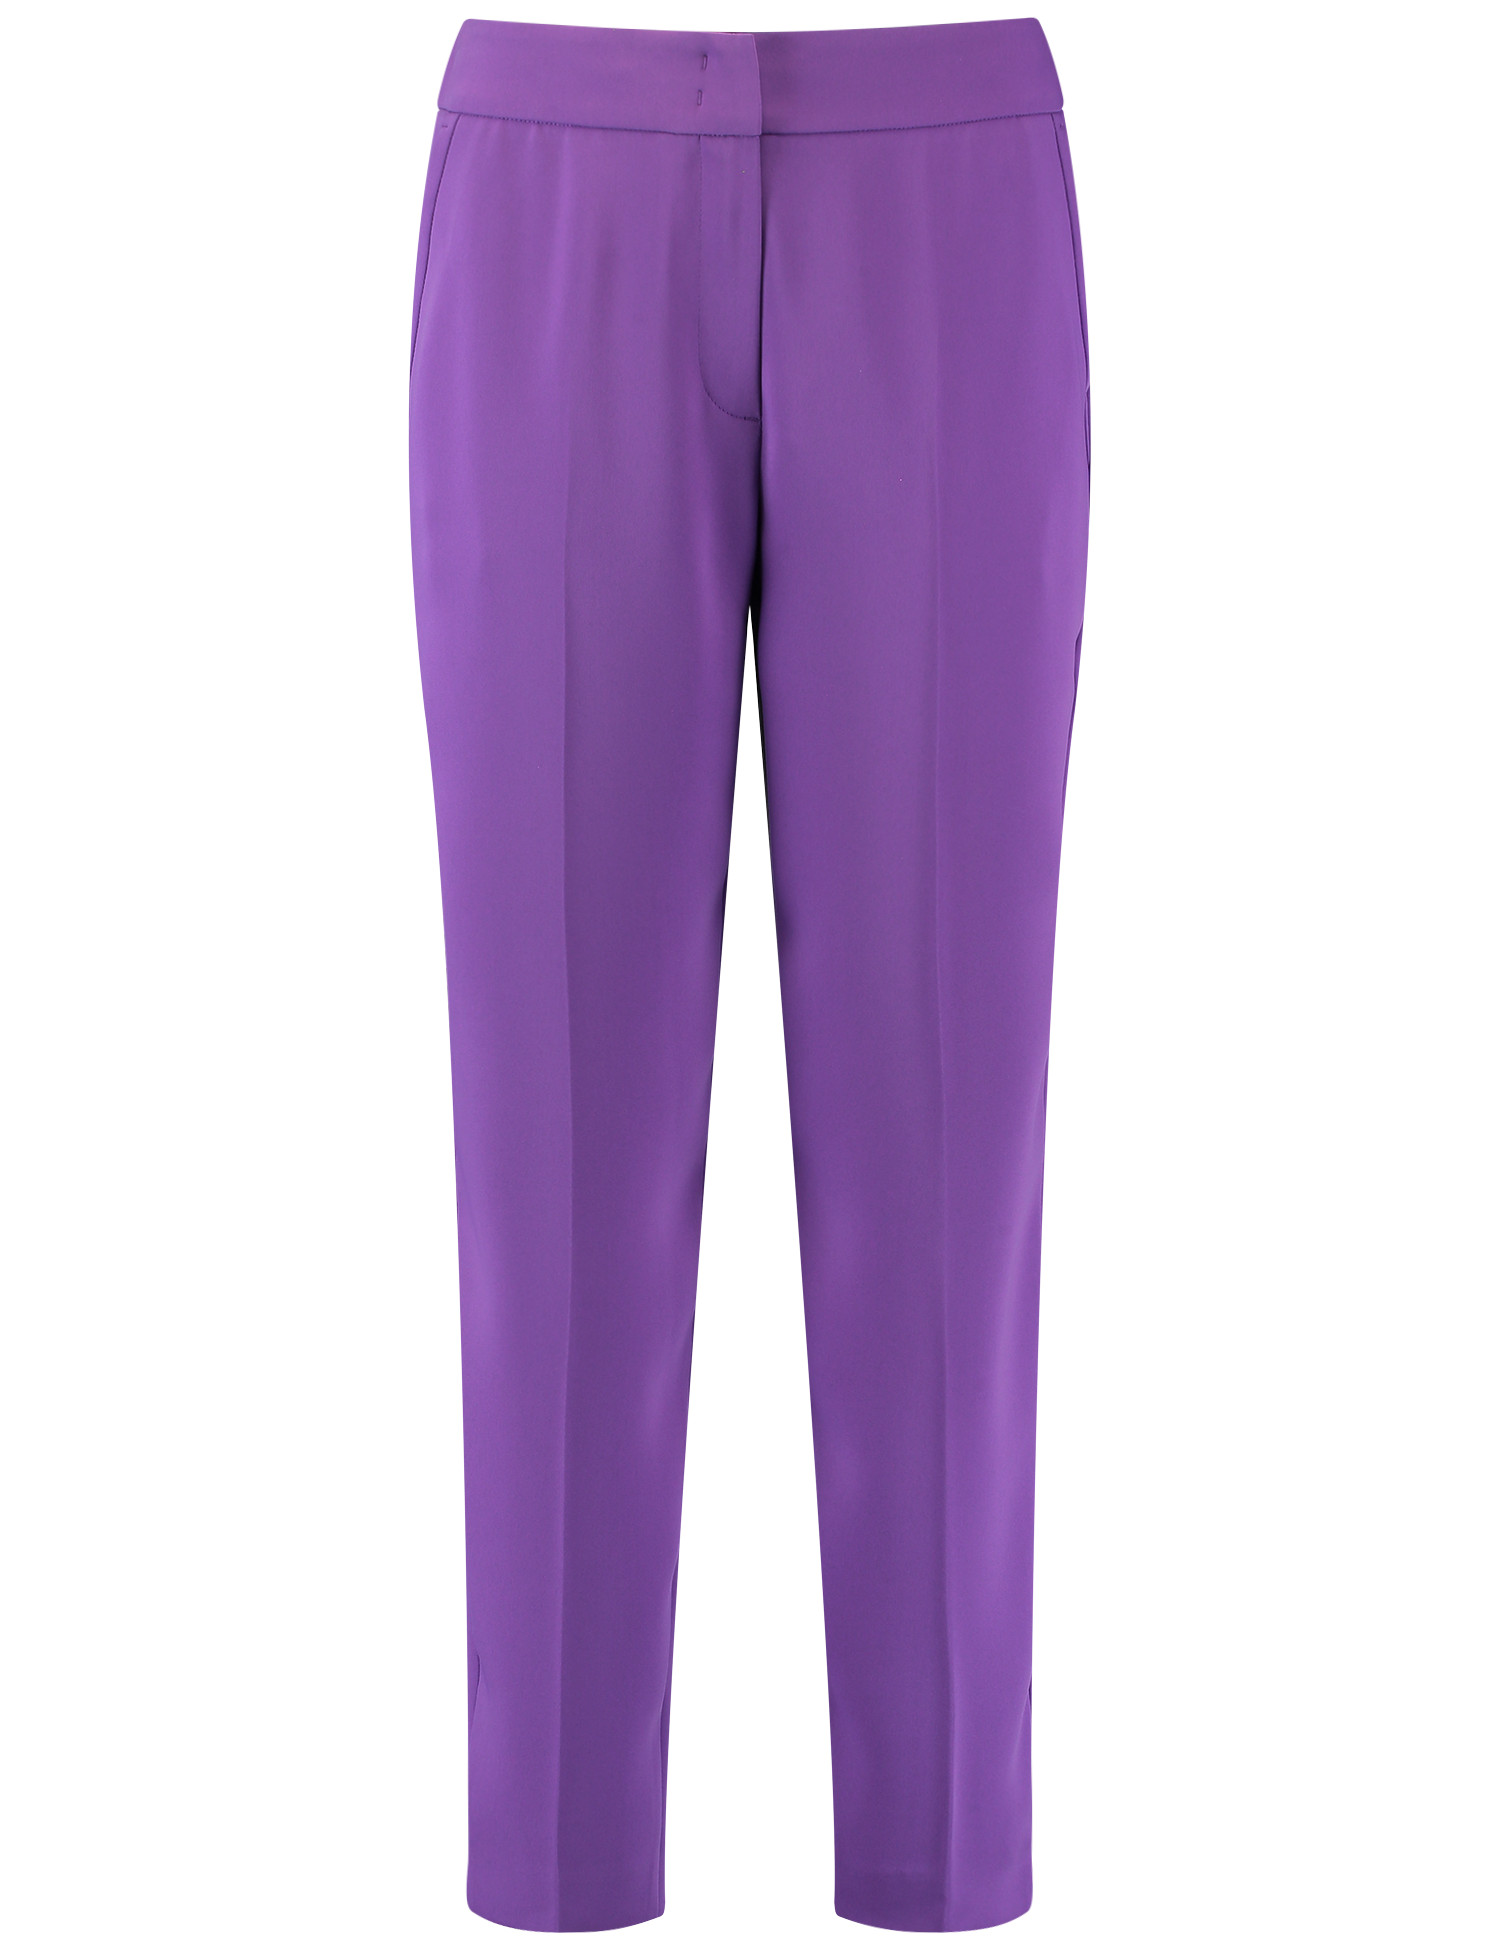 GERRY WEBER PURPLE TROUSERS | Rosella - Style inspired by elegance